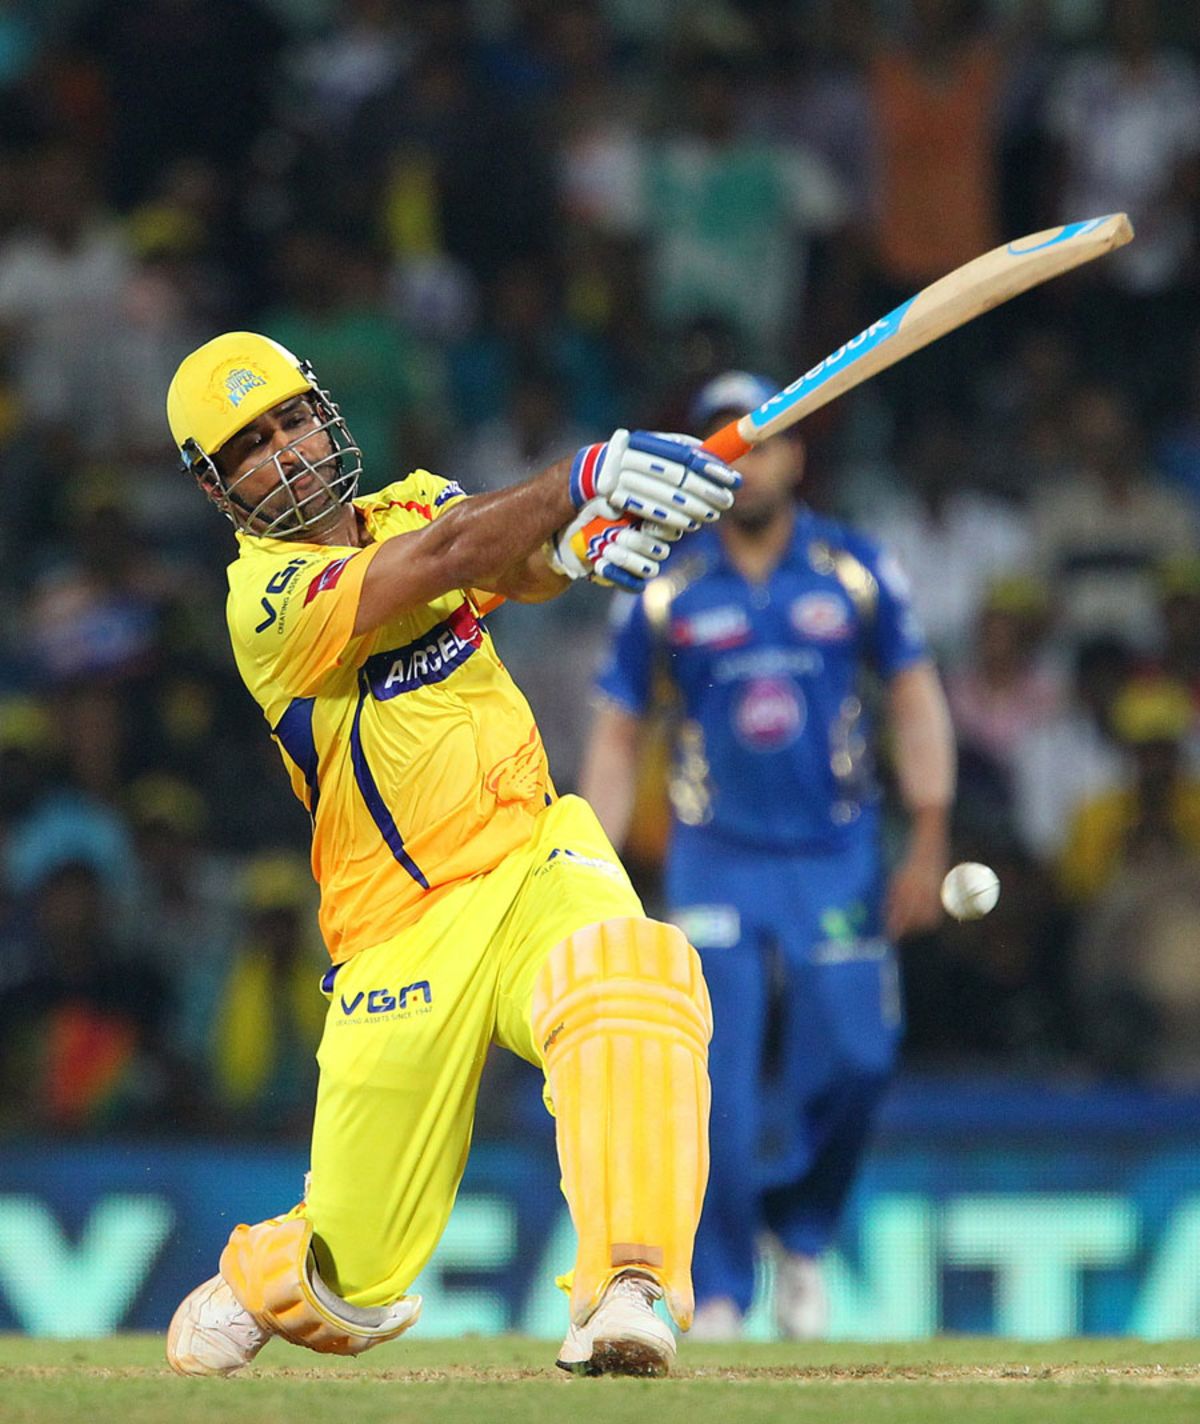 MS Dhoni thrashes one down the ground 